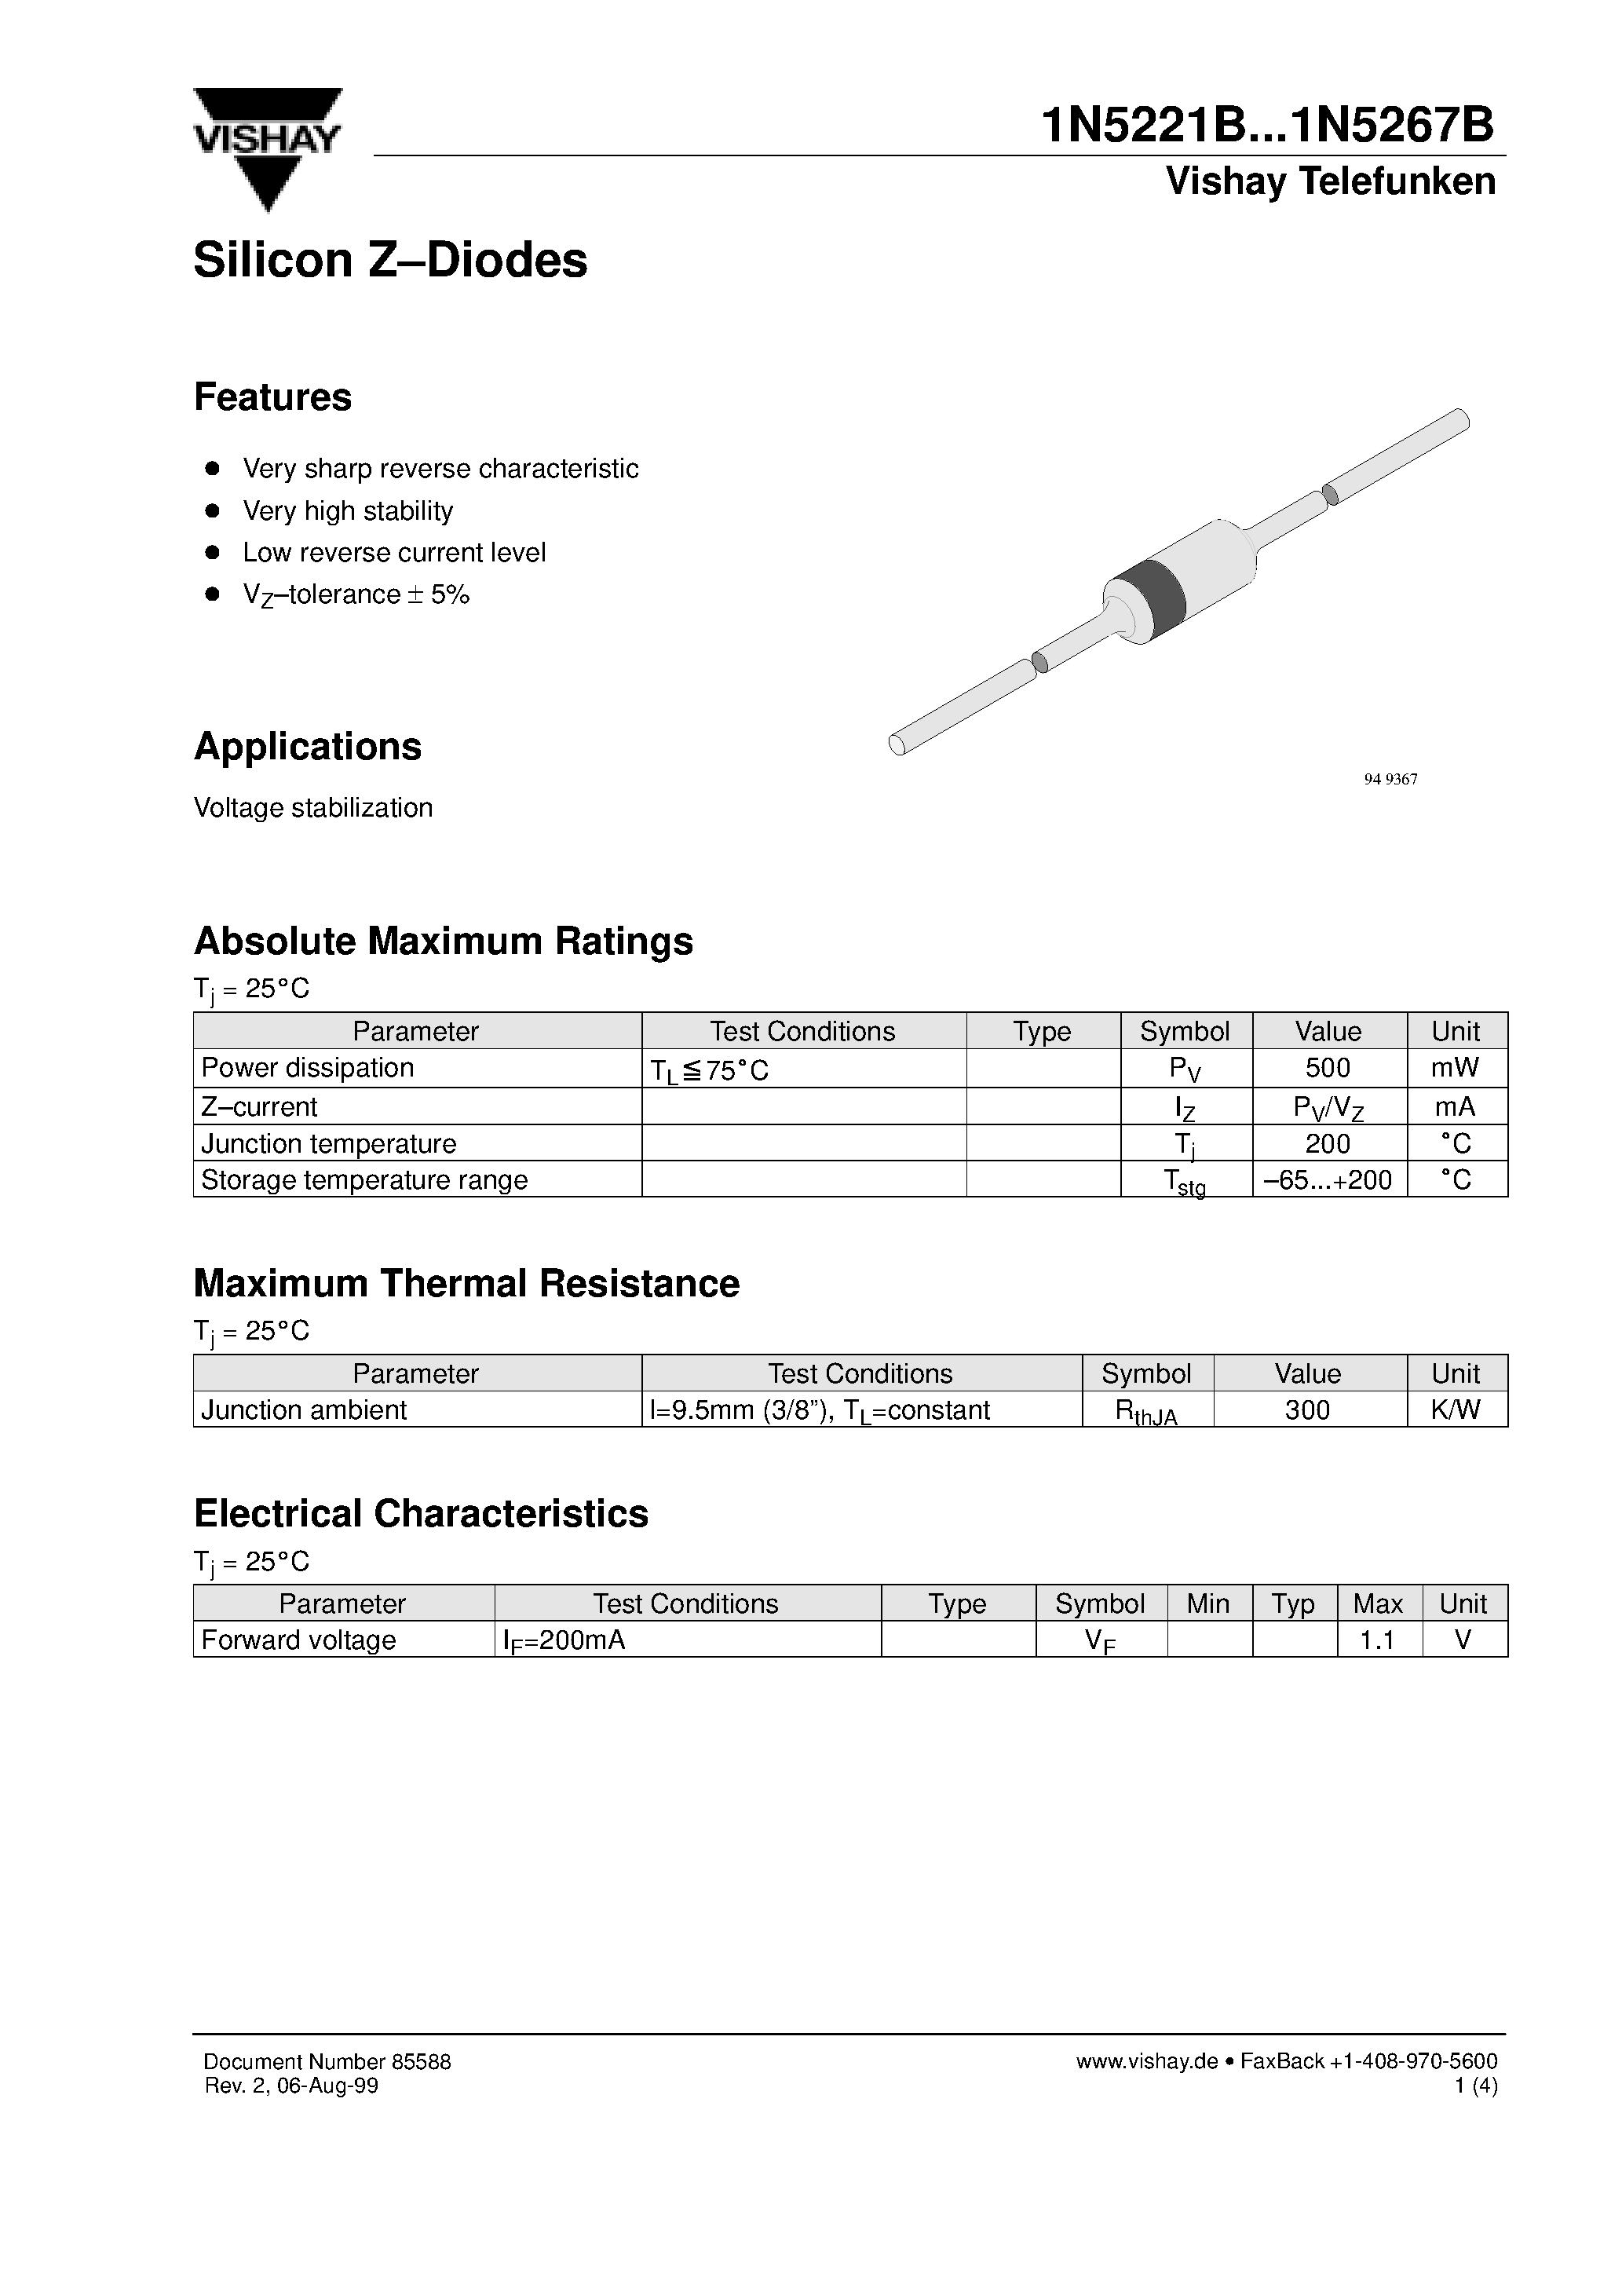 Datasheet 1N5257B - Silicon Z-Diodes page 1